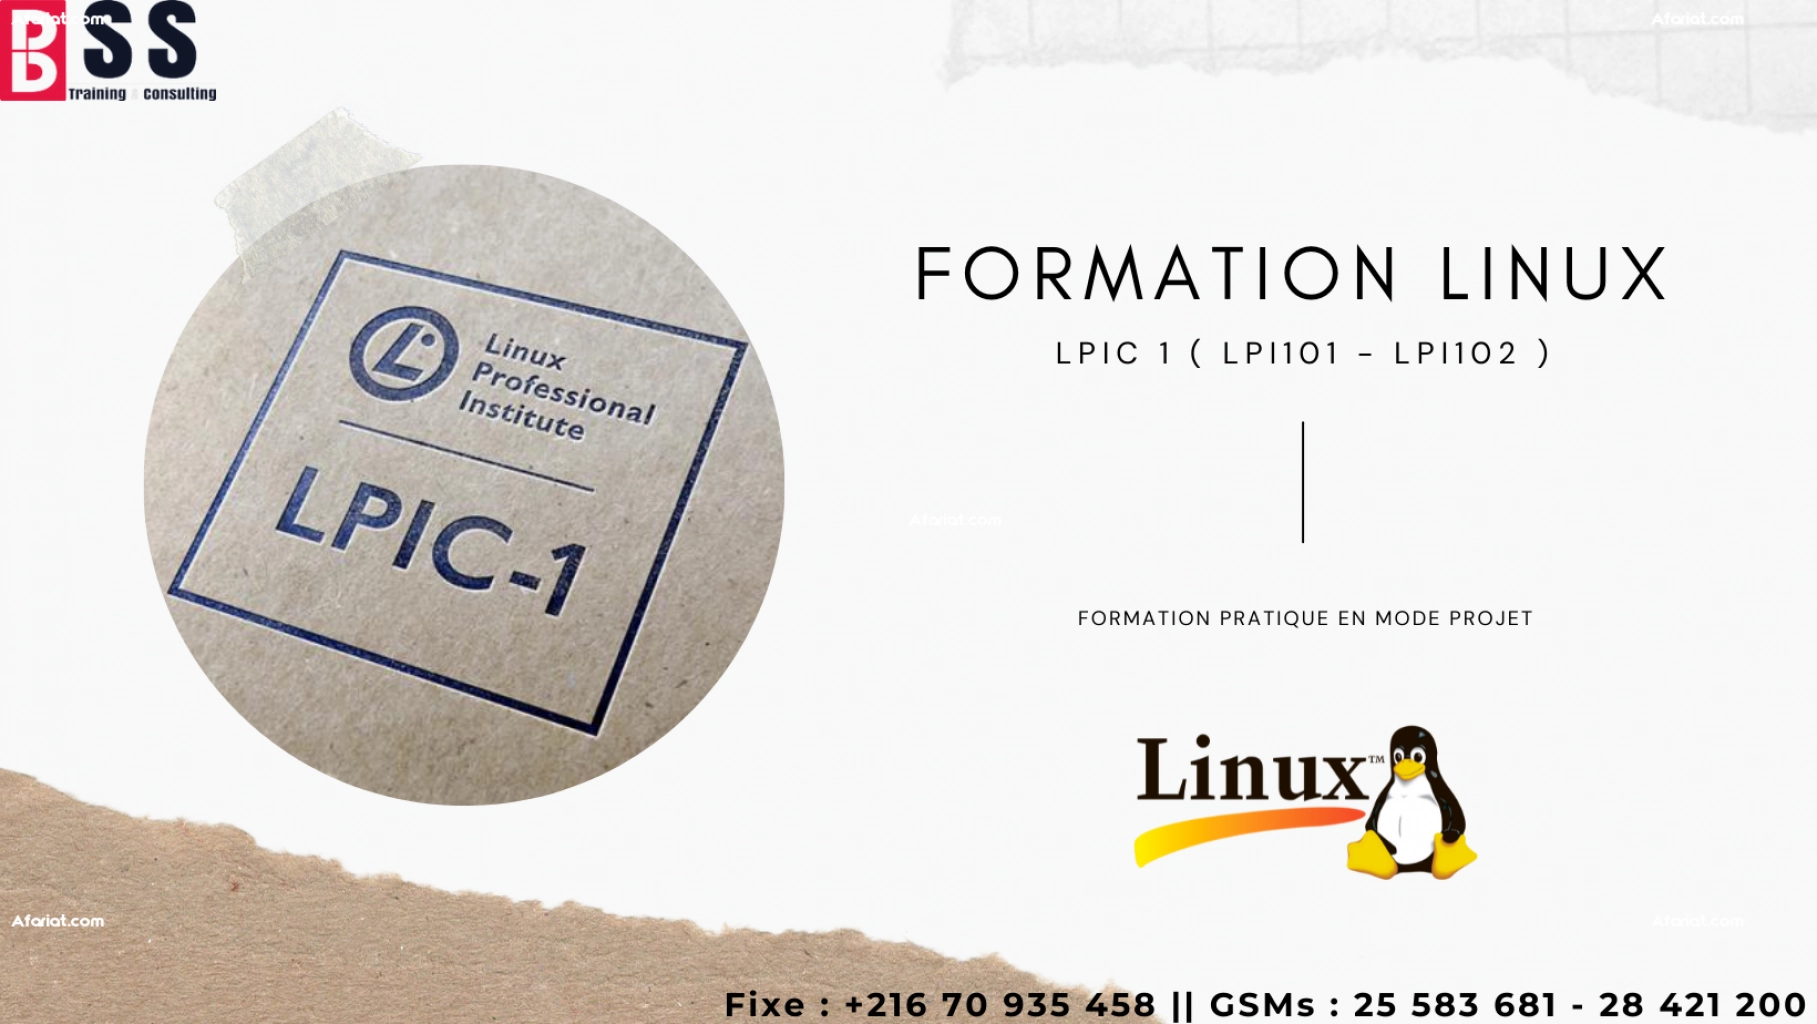 Formation Linux LPIC1